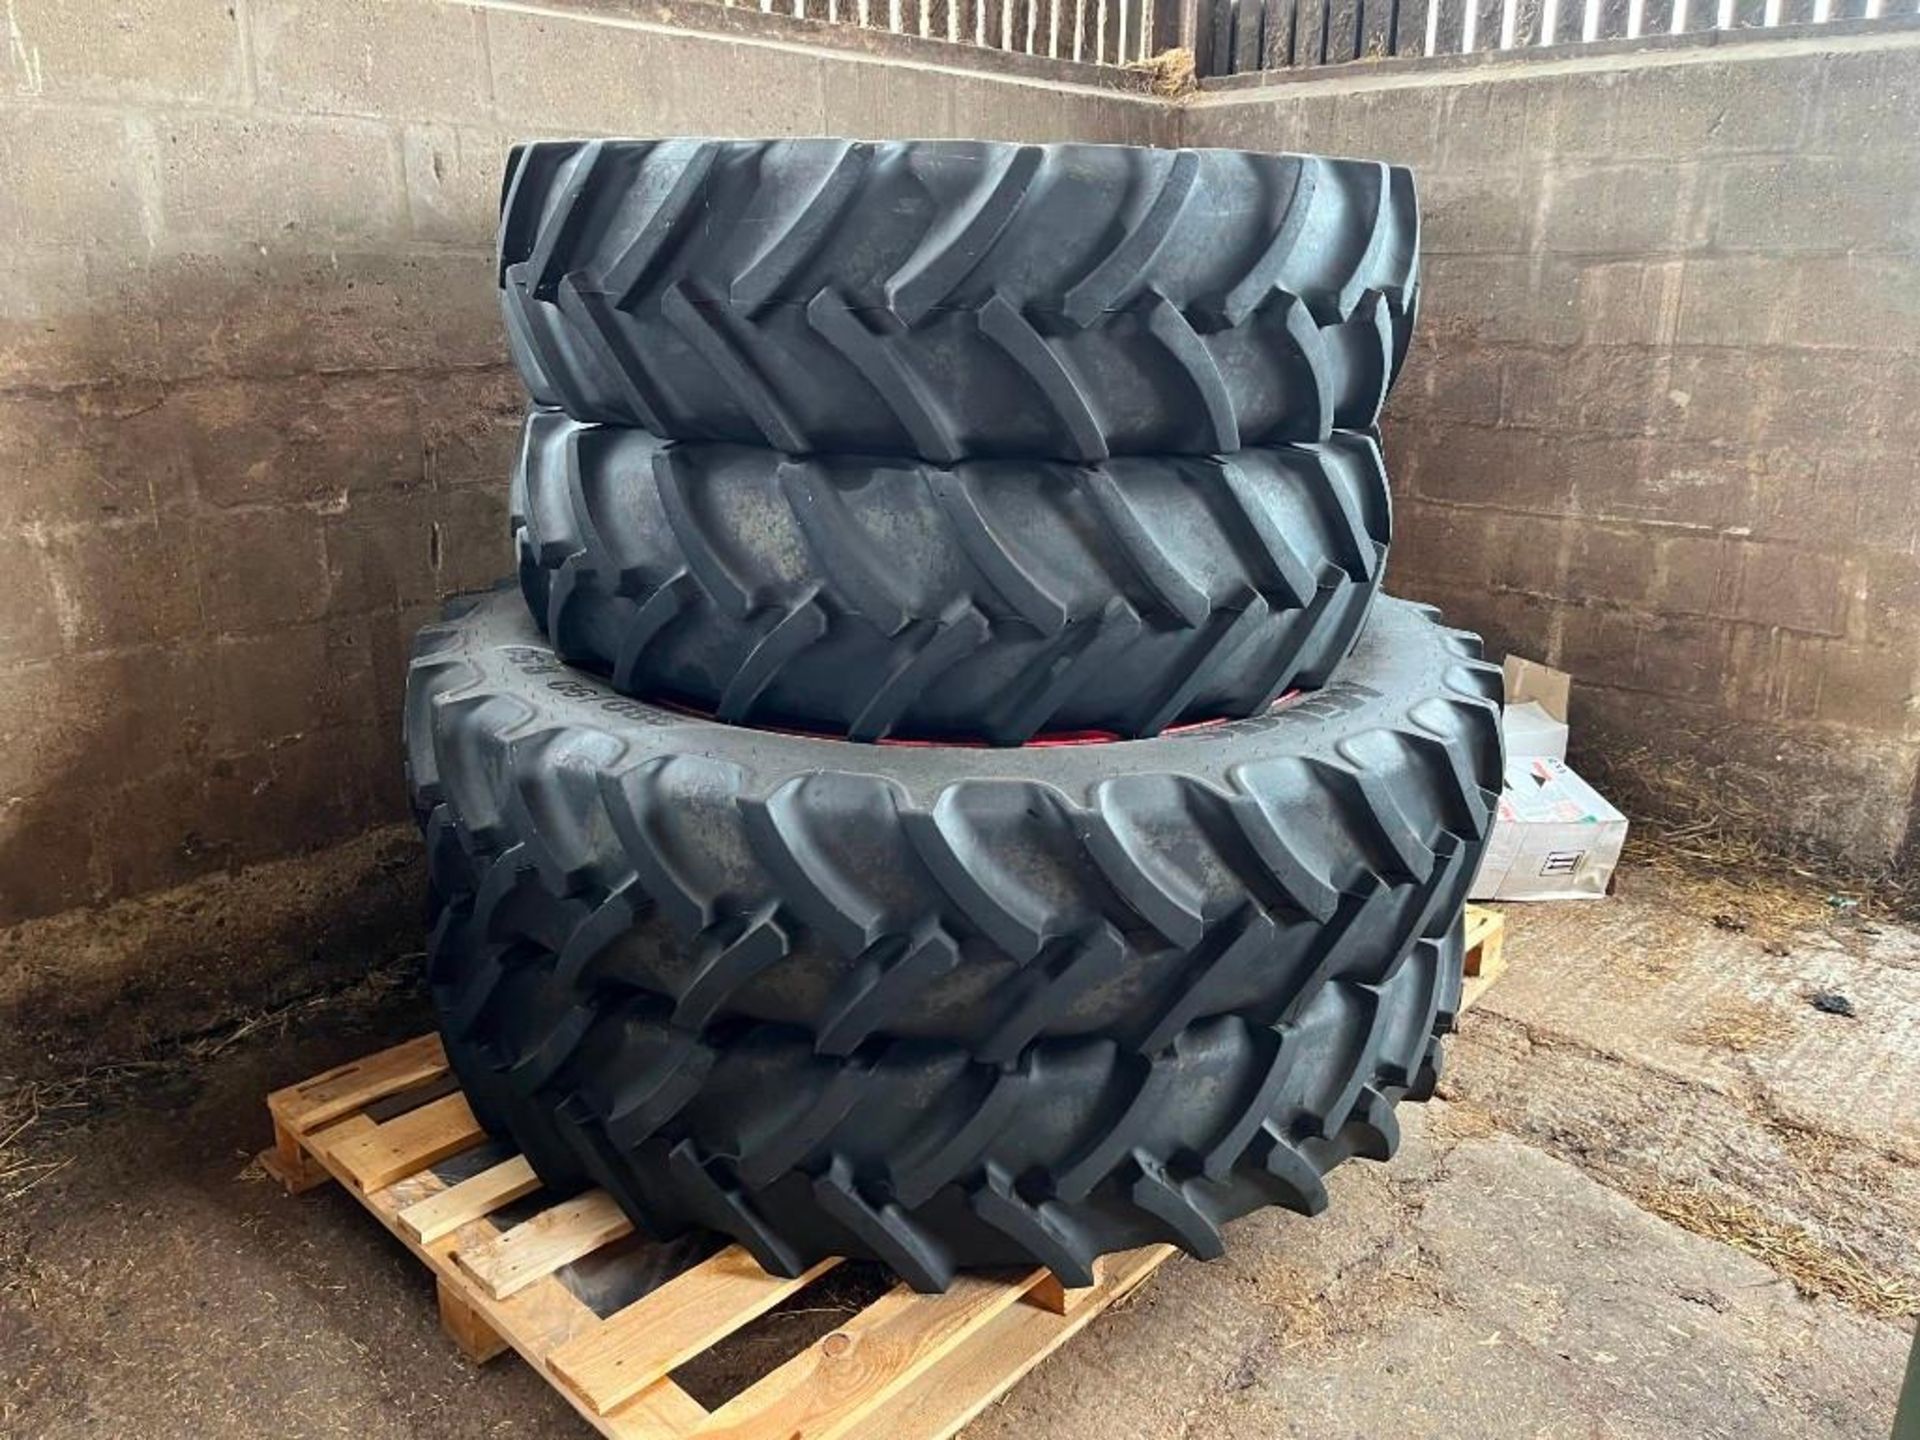 Fendt Row Crop Wheels and Tyres, Rear: 380/85R34, Front: 380/90R50